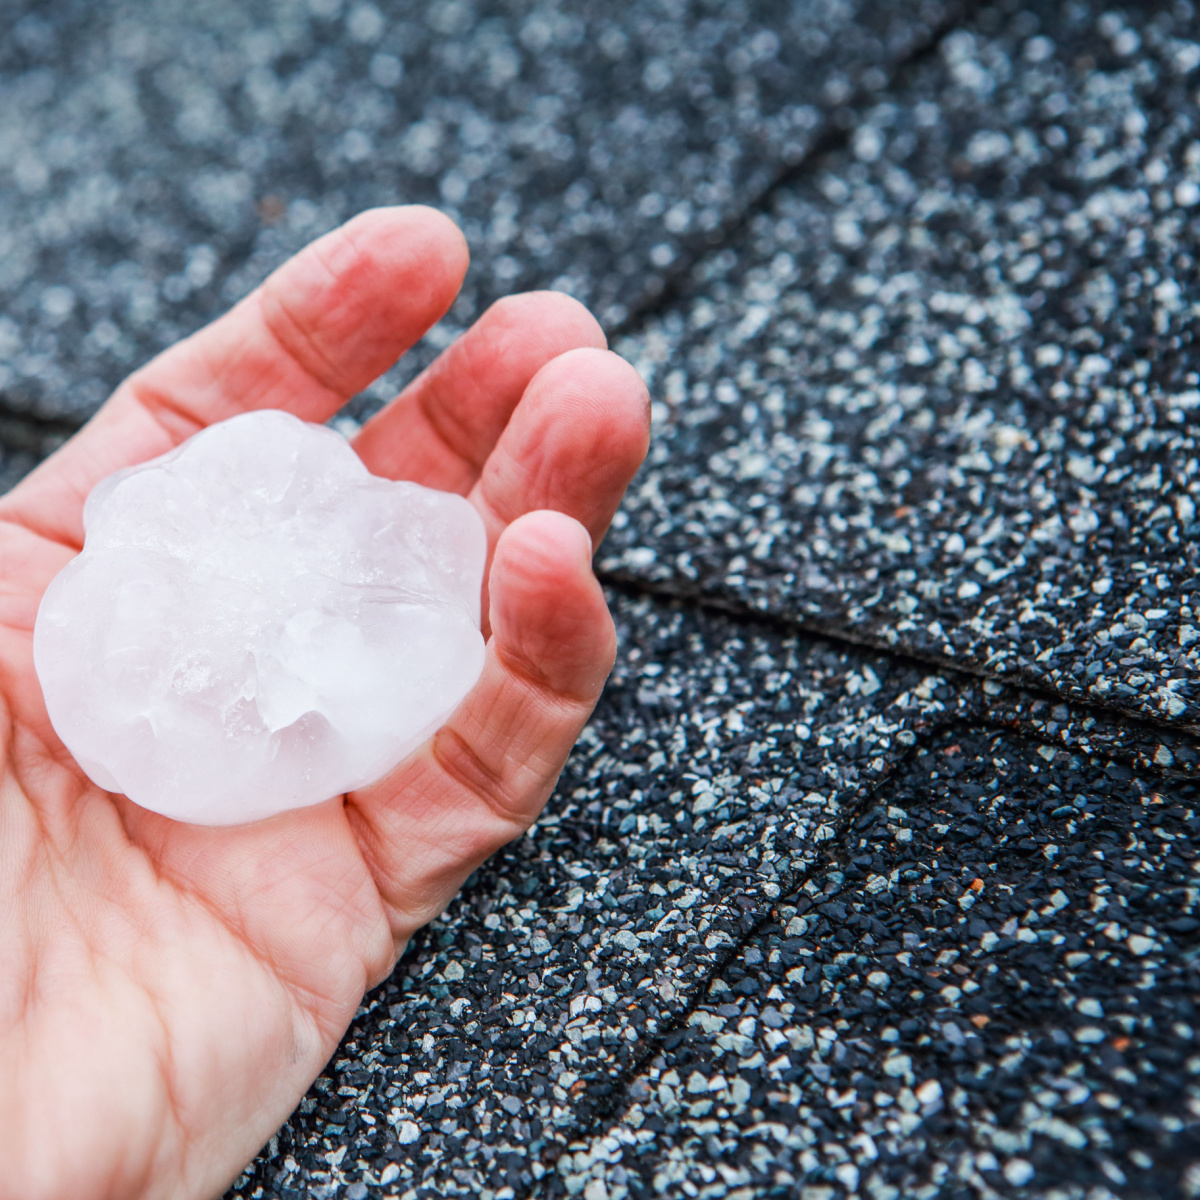 Dallas roofer recovers hail stone from damaged roof.